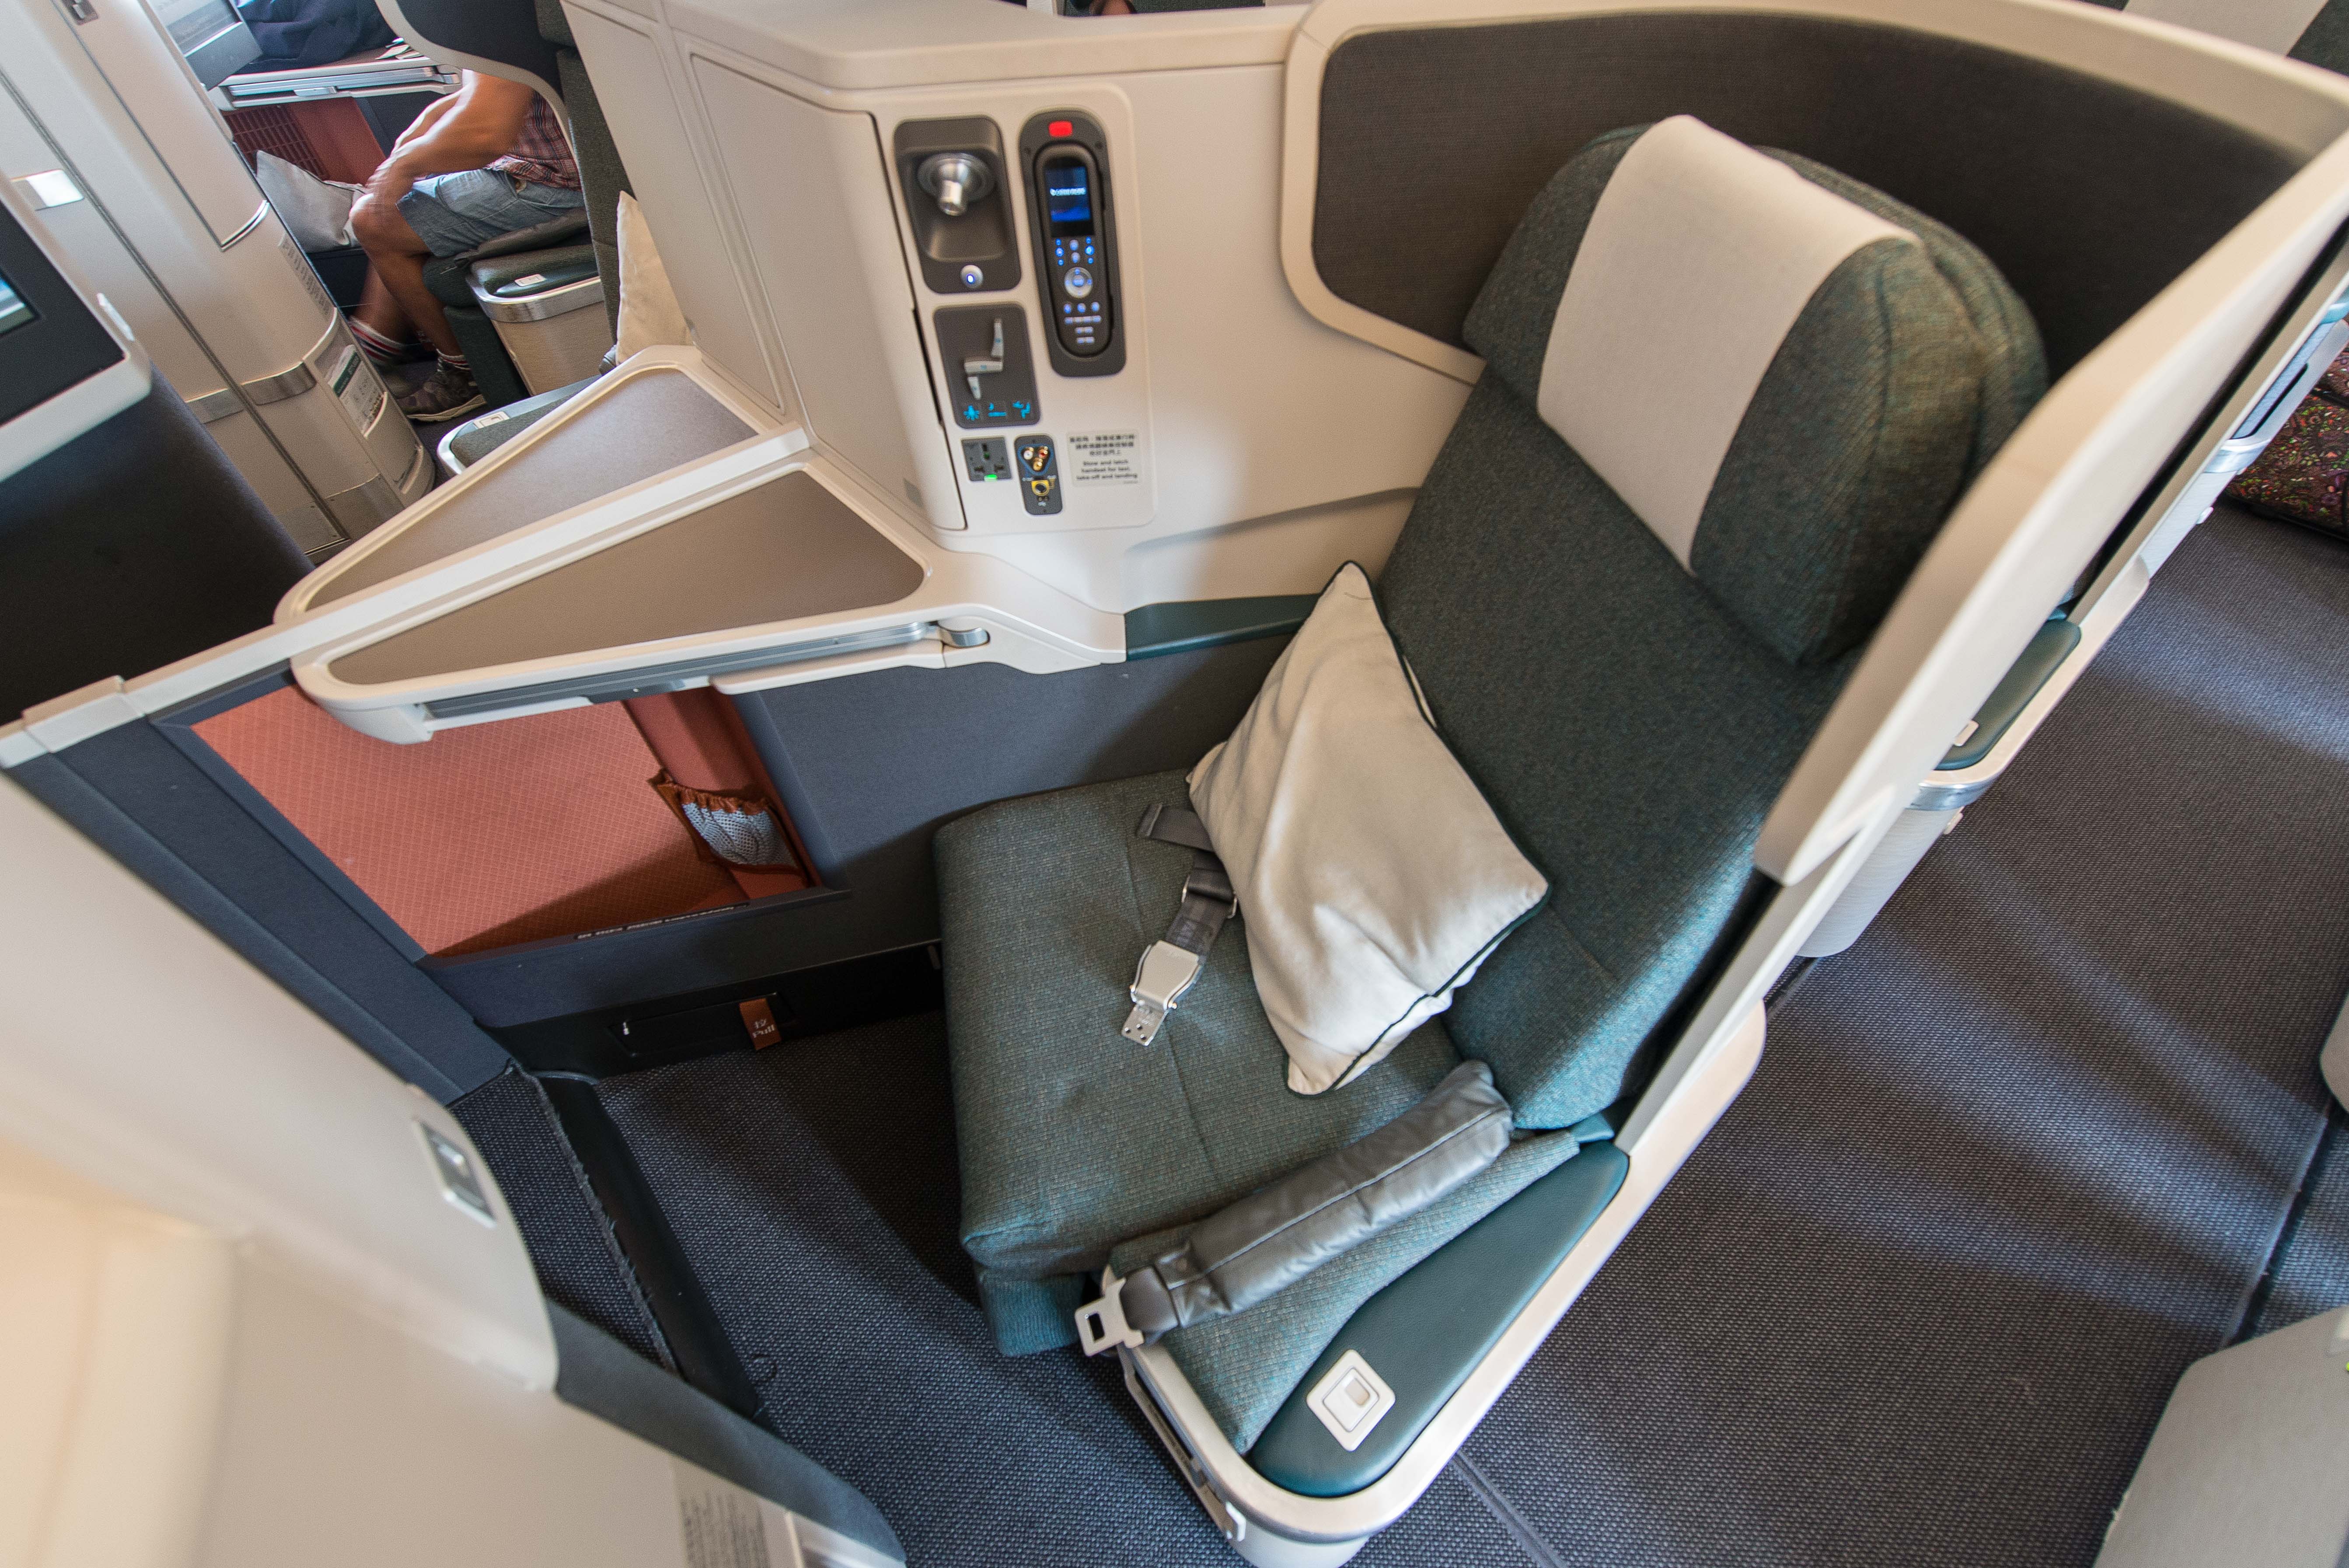 Cathay Pacific 77W Business Class Seat2